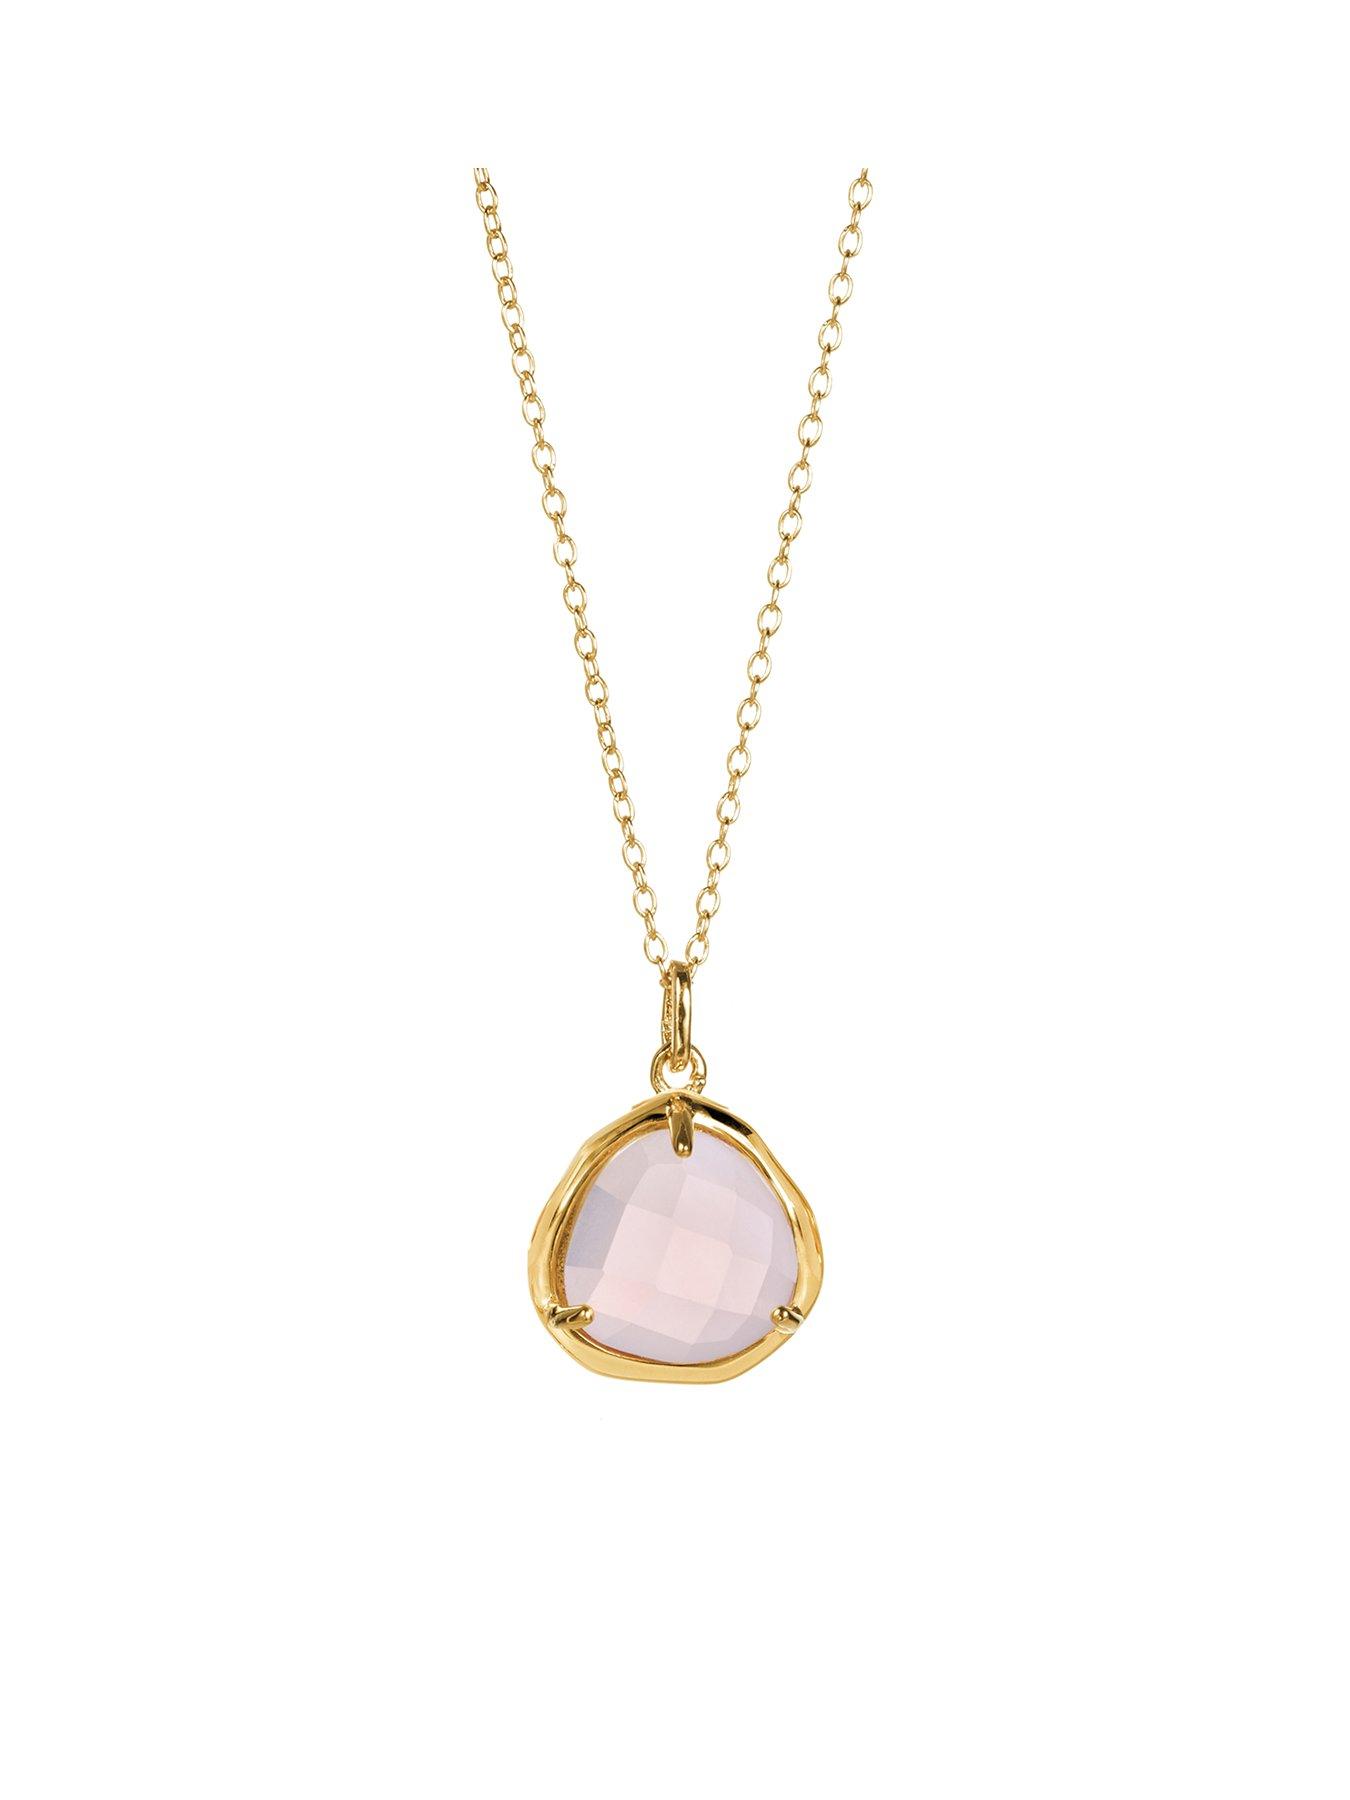  Gold Plated Silver Rose Quartz Crystal Pendant 18 Inch Chain